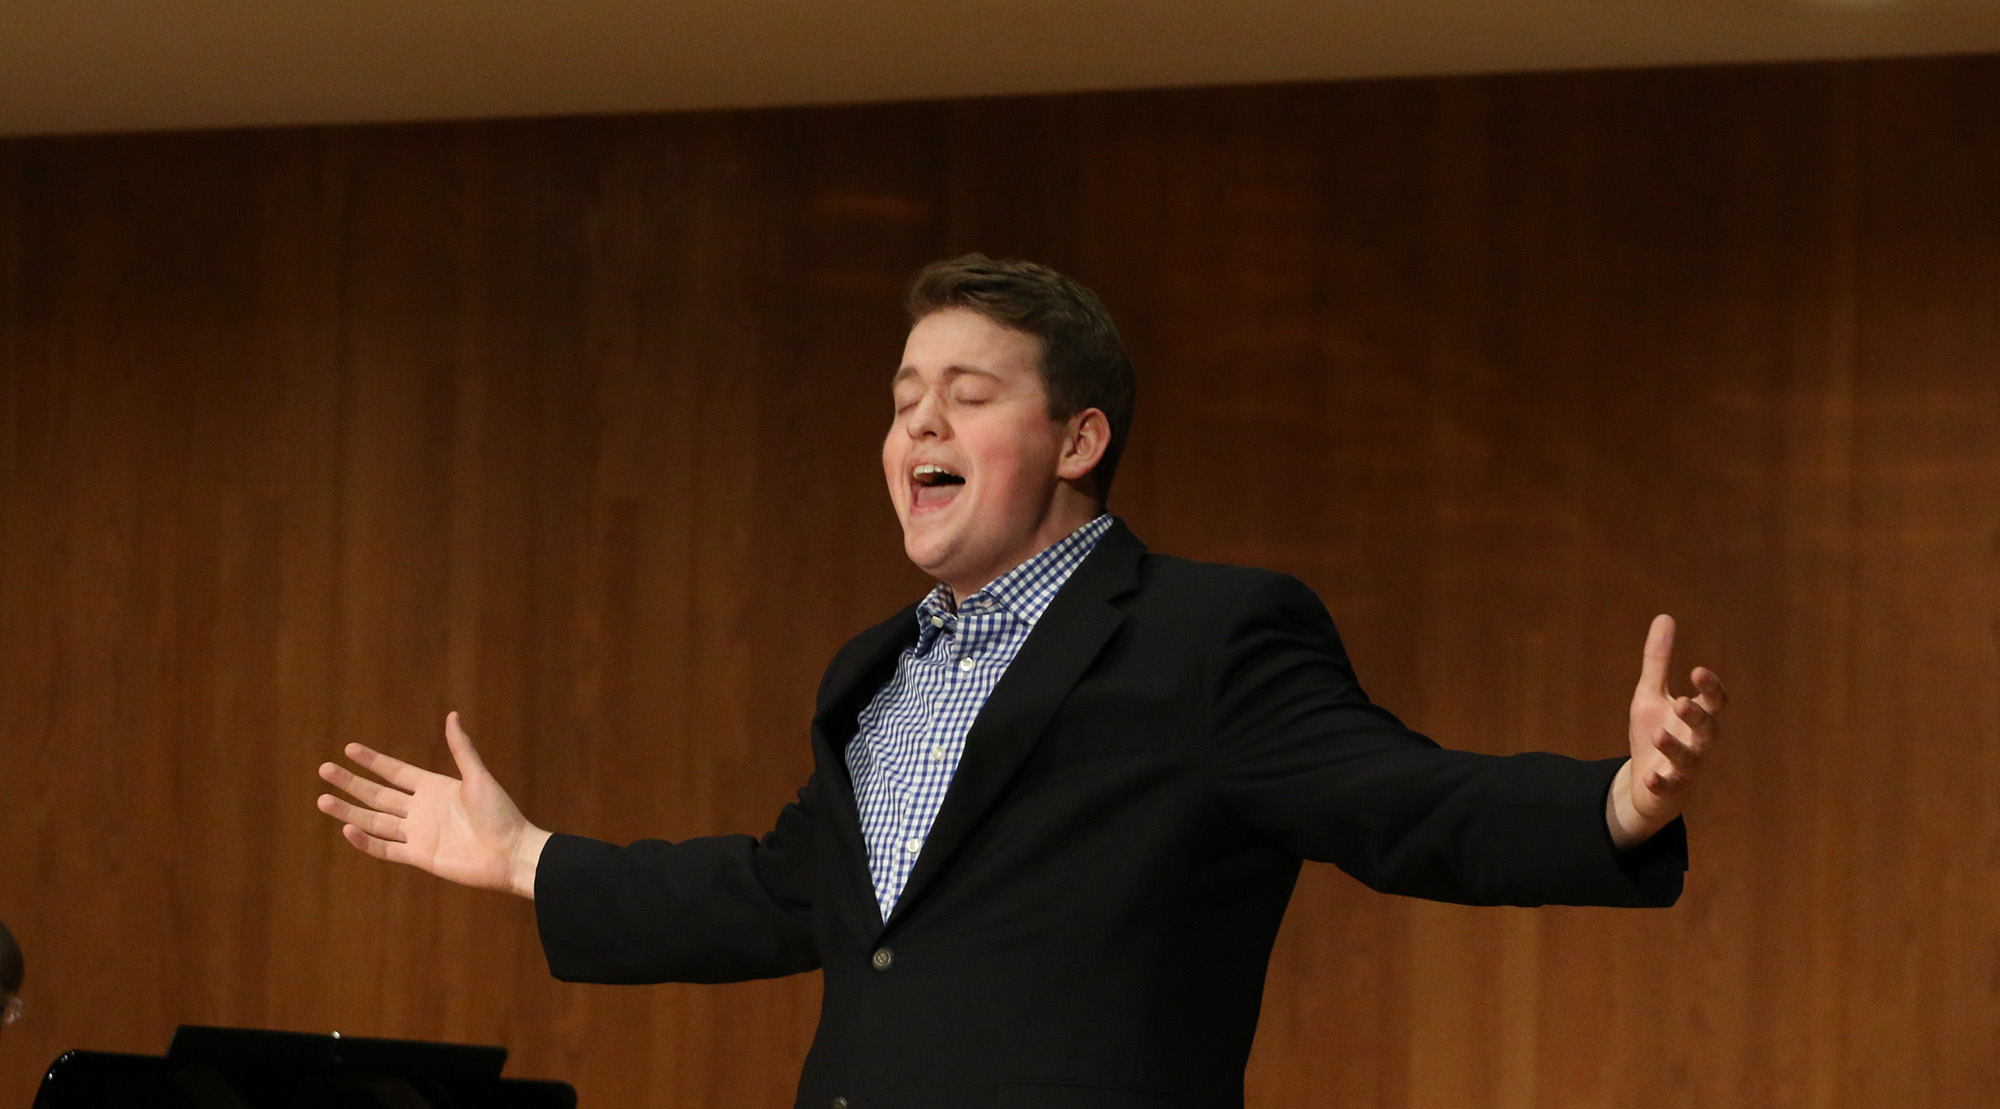 Will Stotts gave the winning performance in the 2016 Shambarger Competition for Singers.